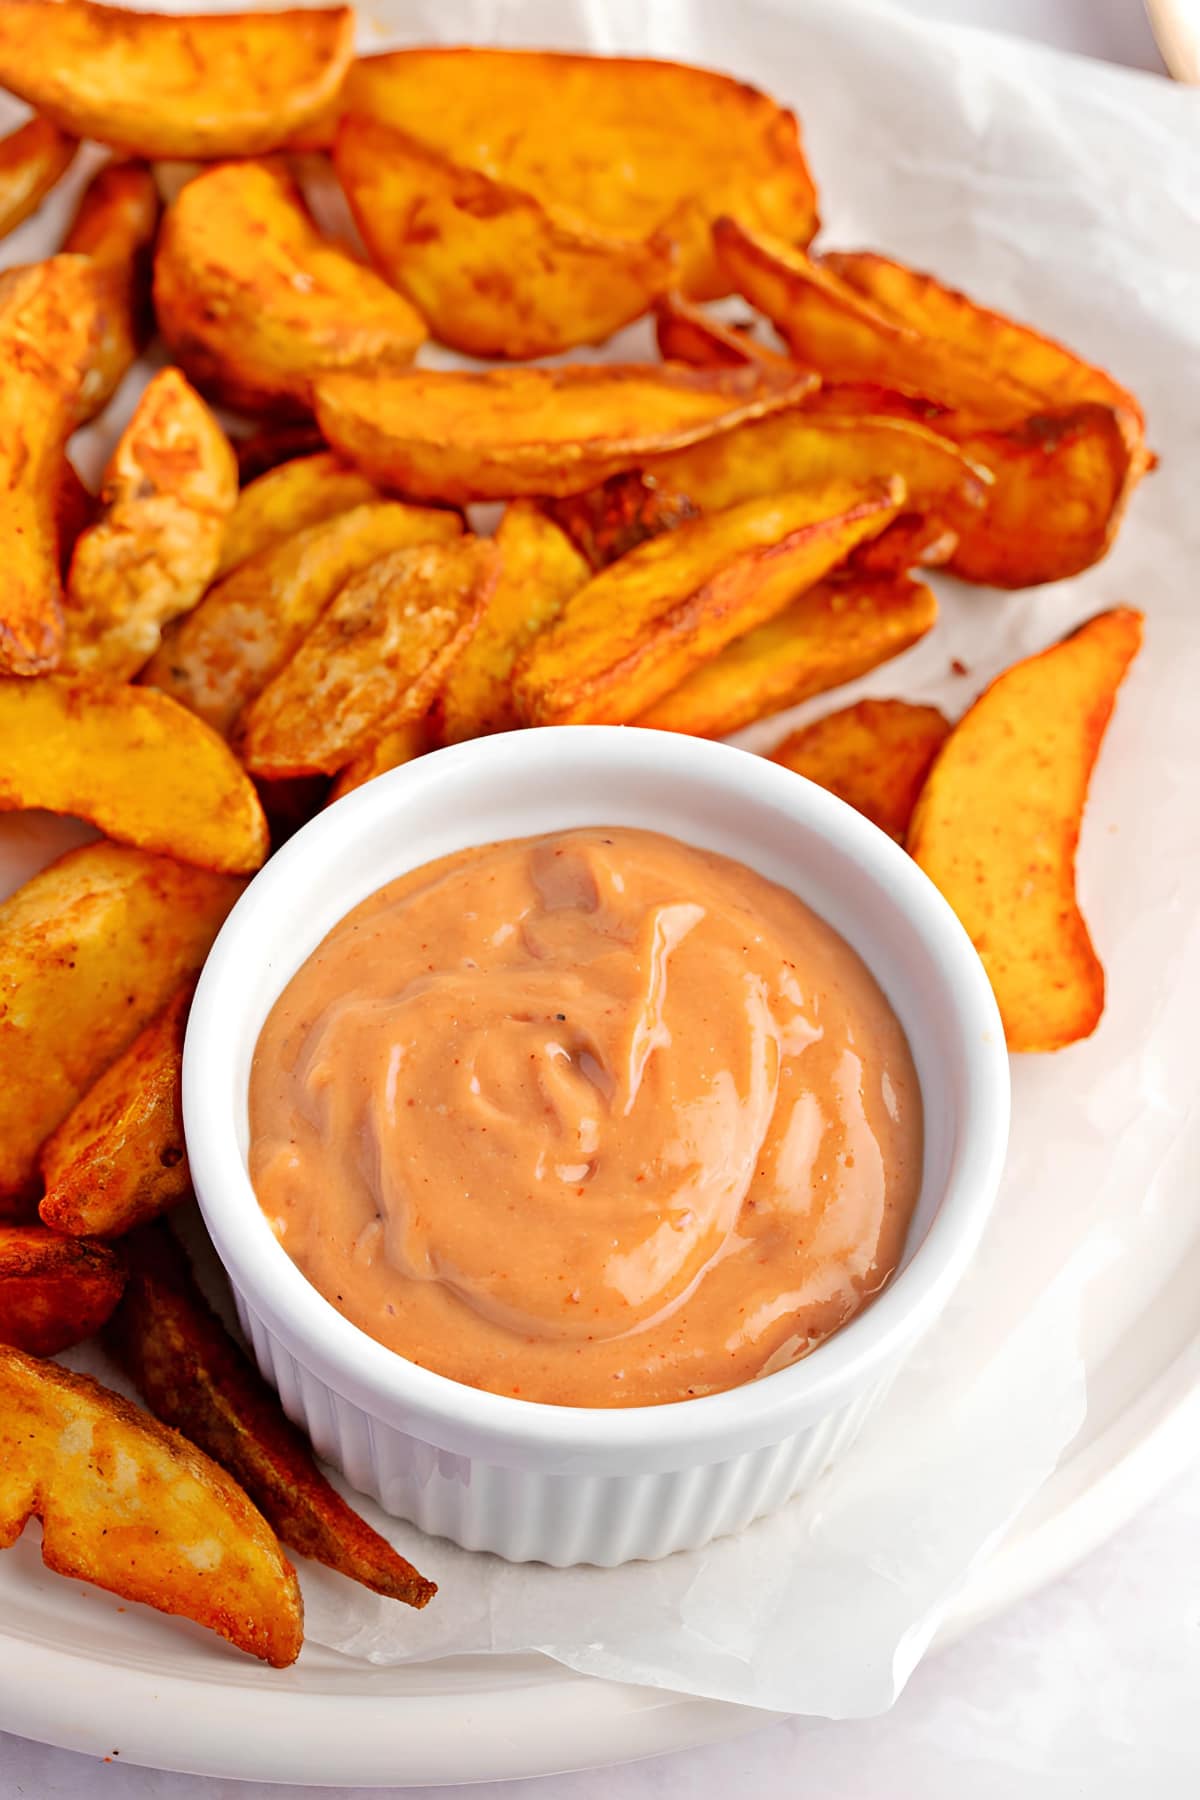 Bowl of dipping sauce with fried potato wedges.